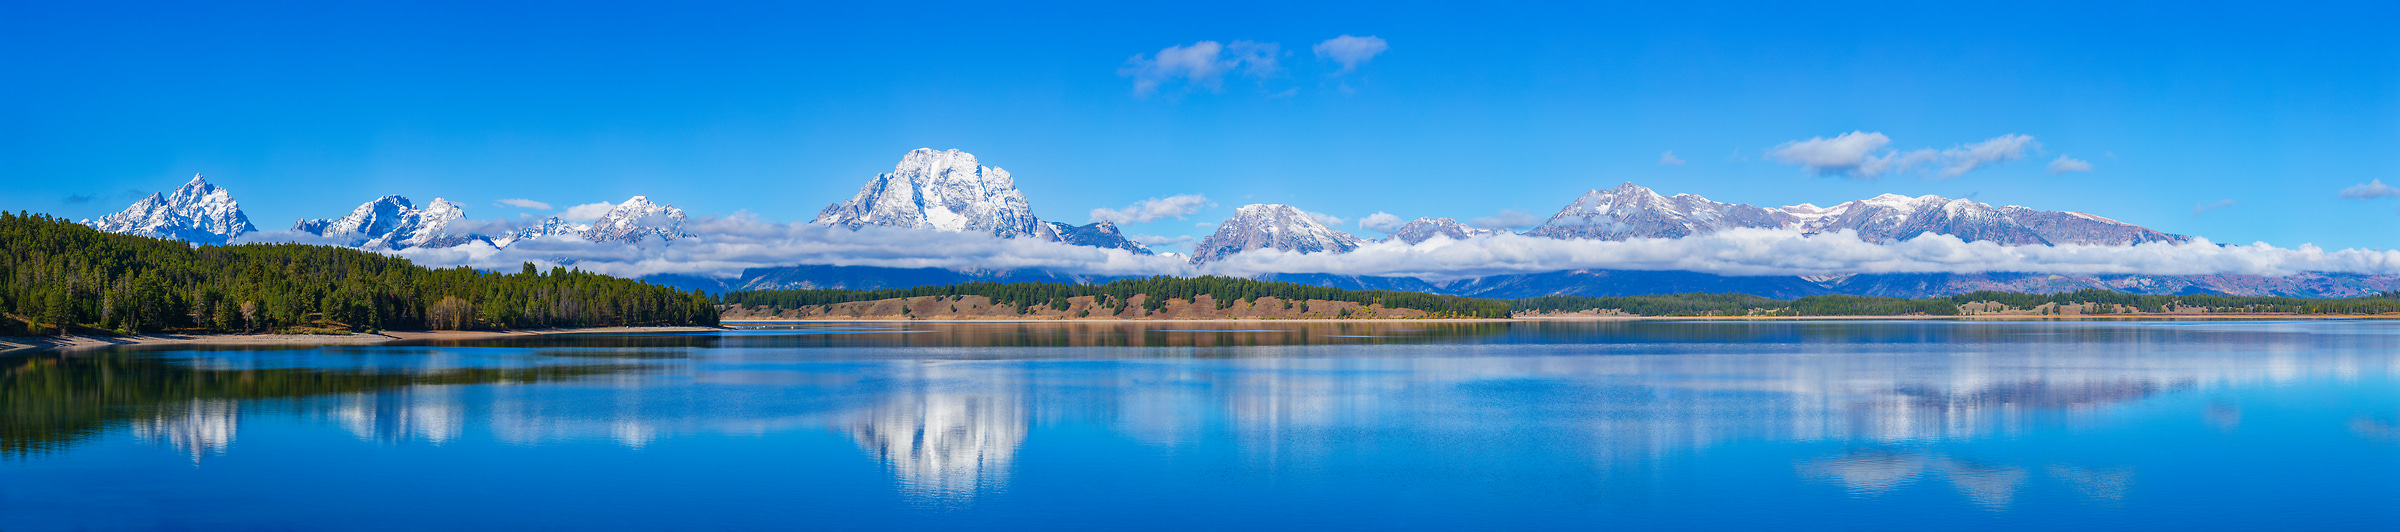 530 megapixels! A very high resolution, large-format mural photo of a mountain range and a lake; landscape photograph created by John Freeman in Jackson Lake, Grand Tetons National Park, Wyoming